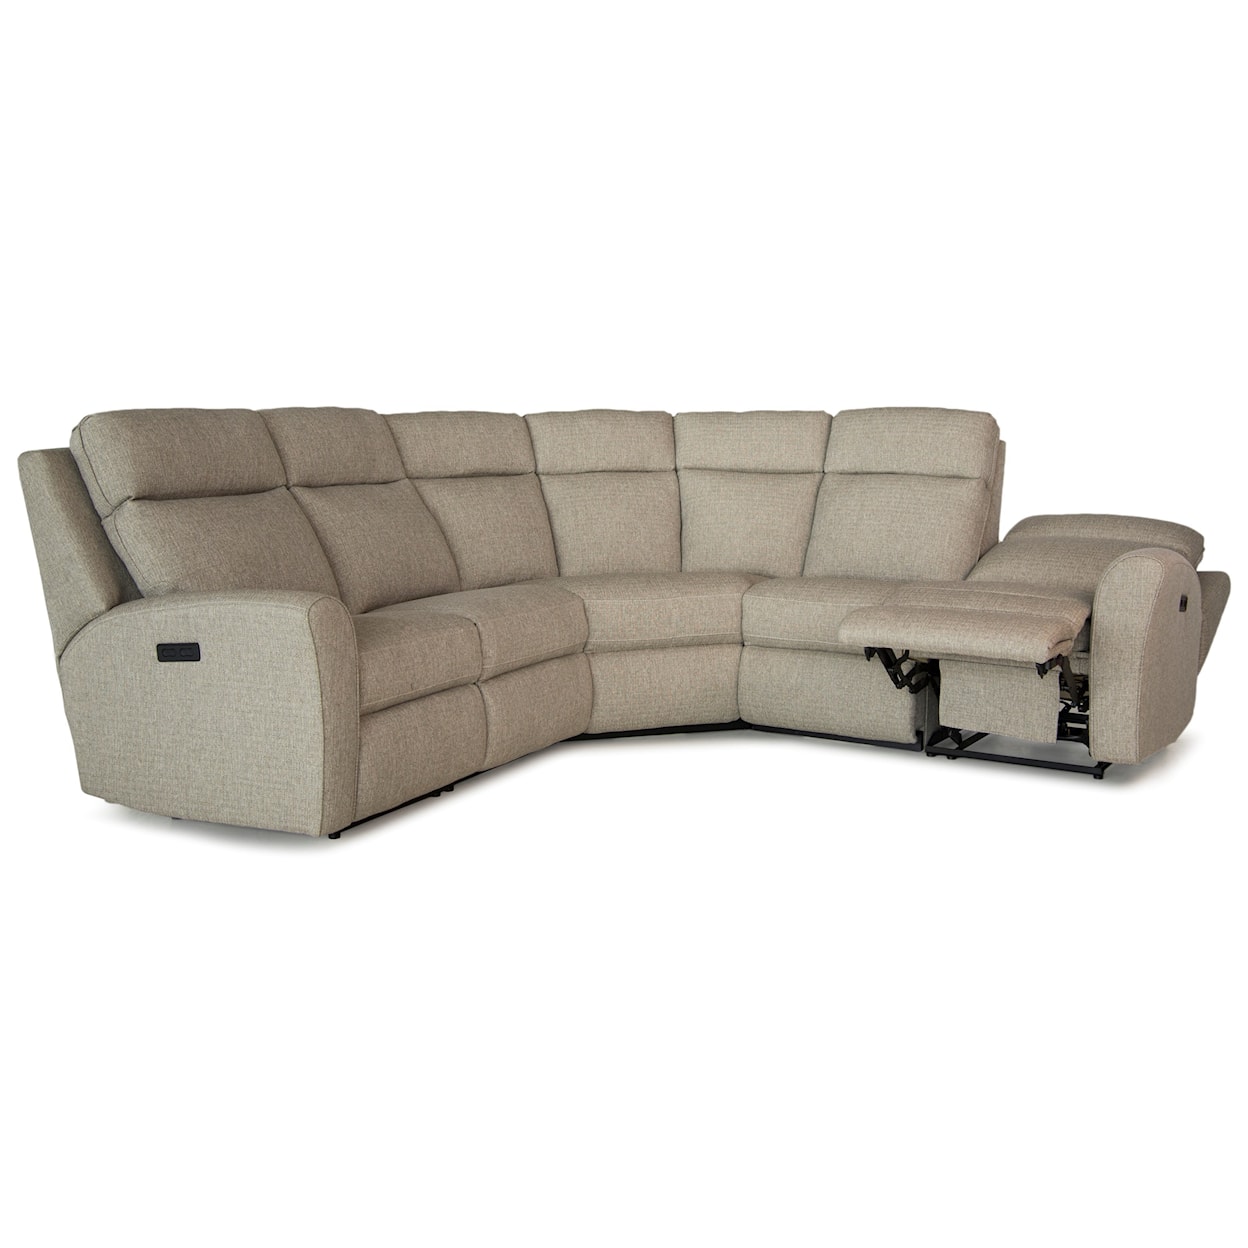 Smith Brothers 418 Motorized Reclining Sectional Sofa